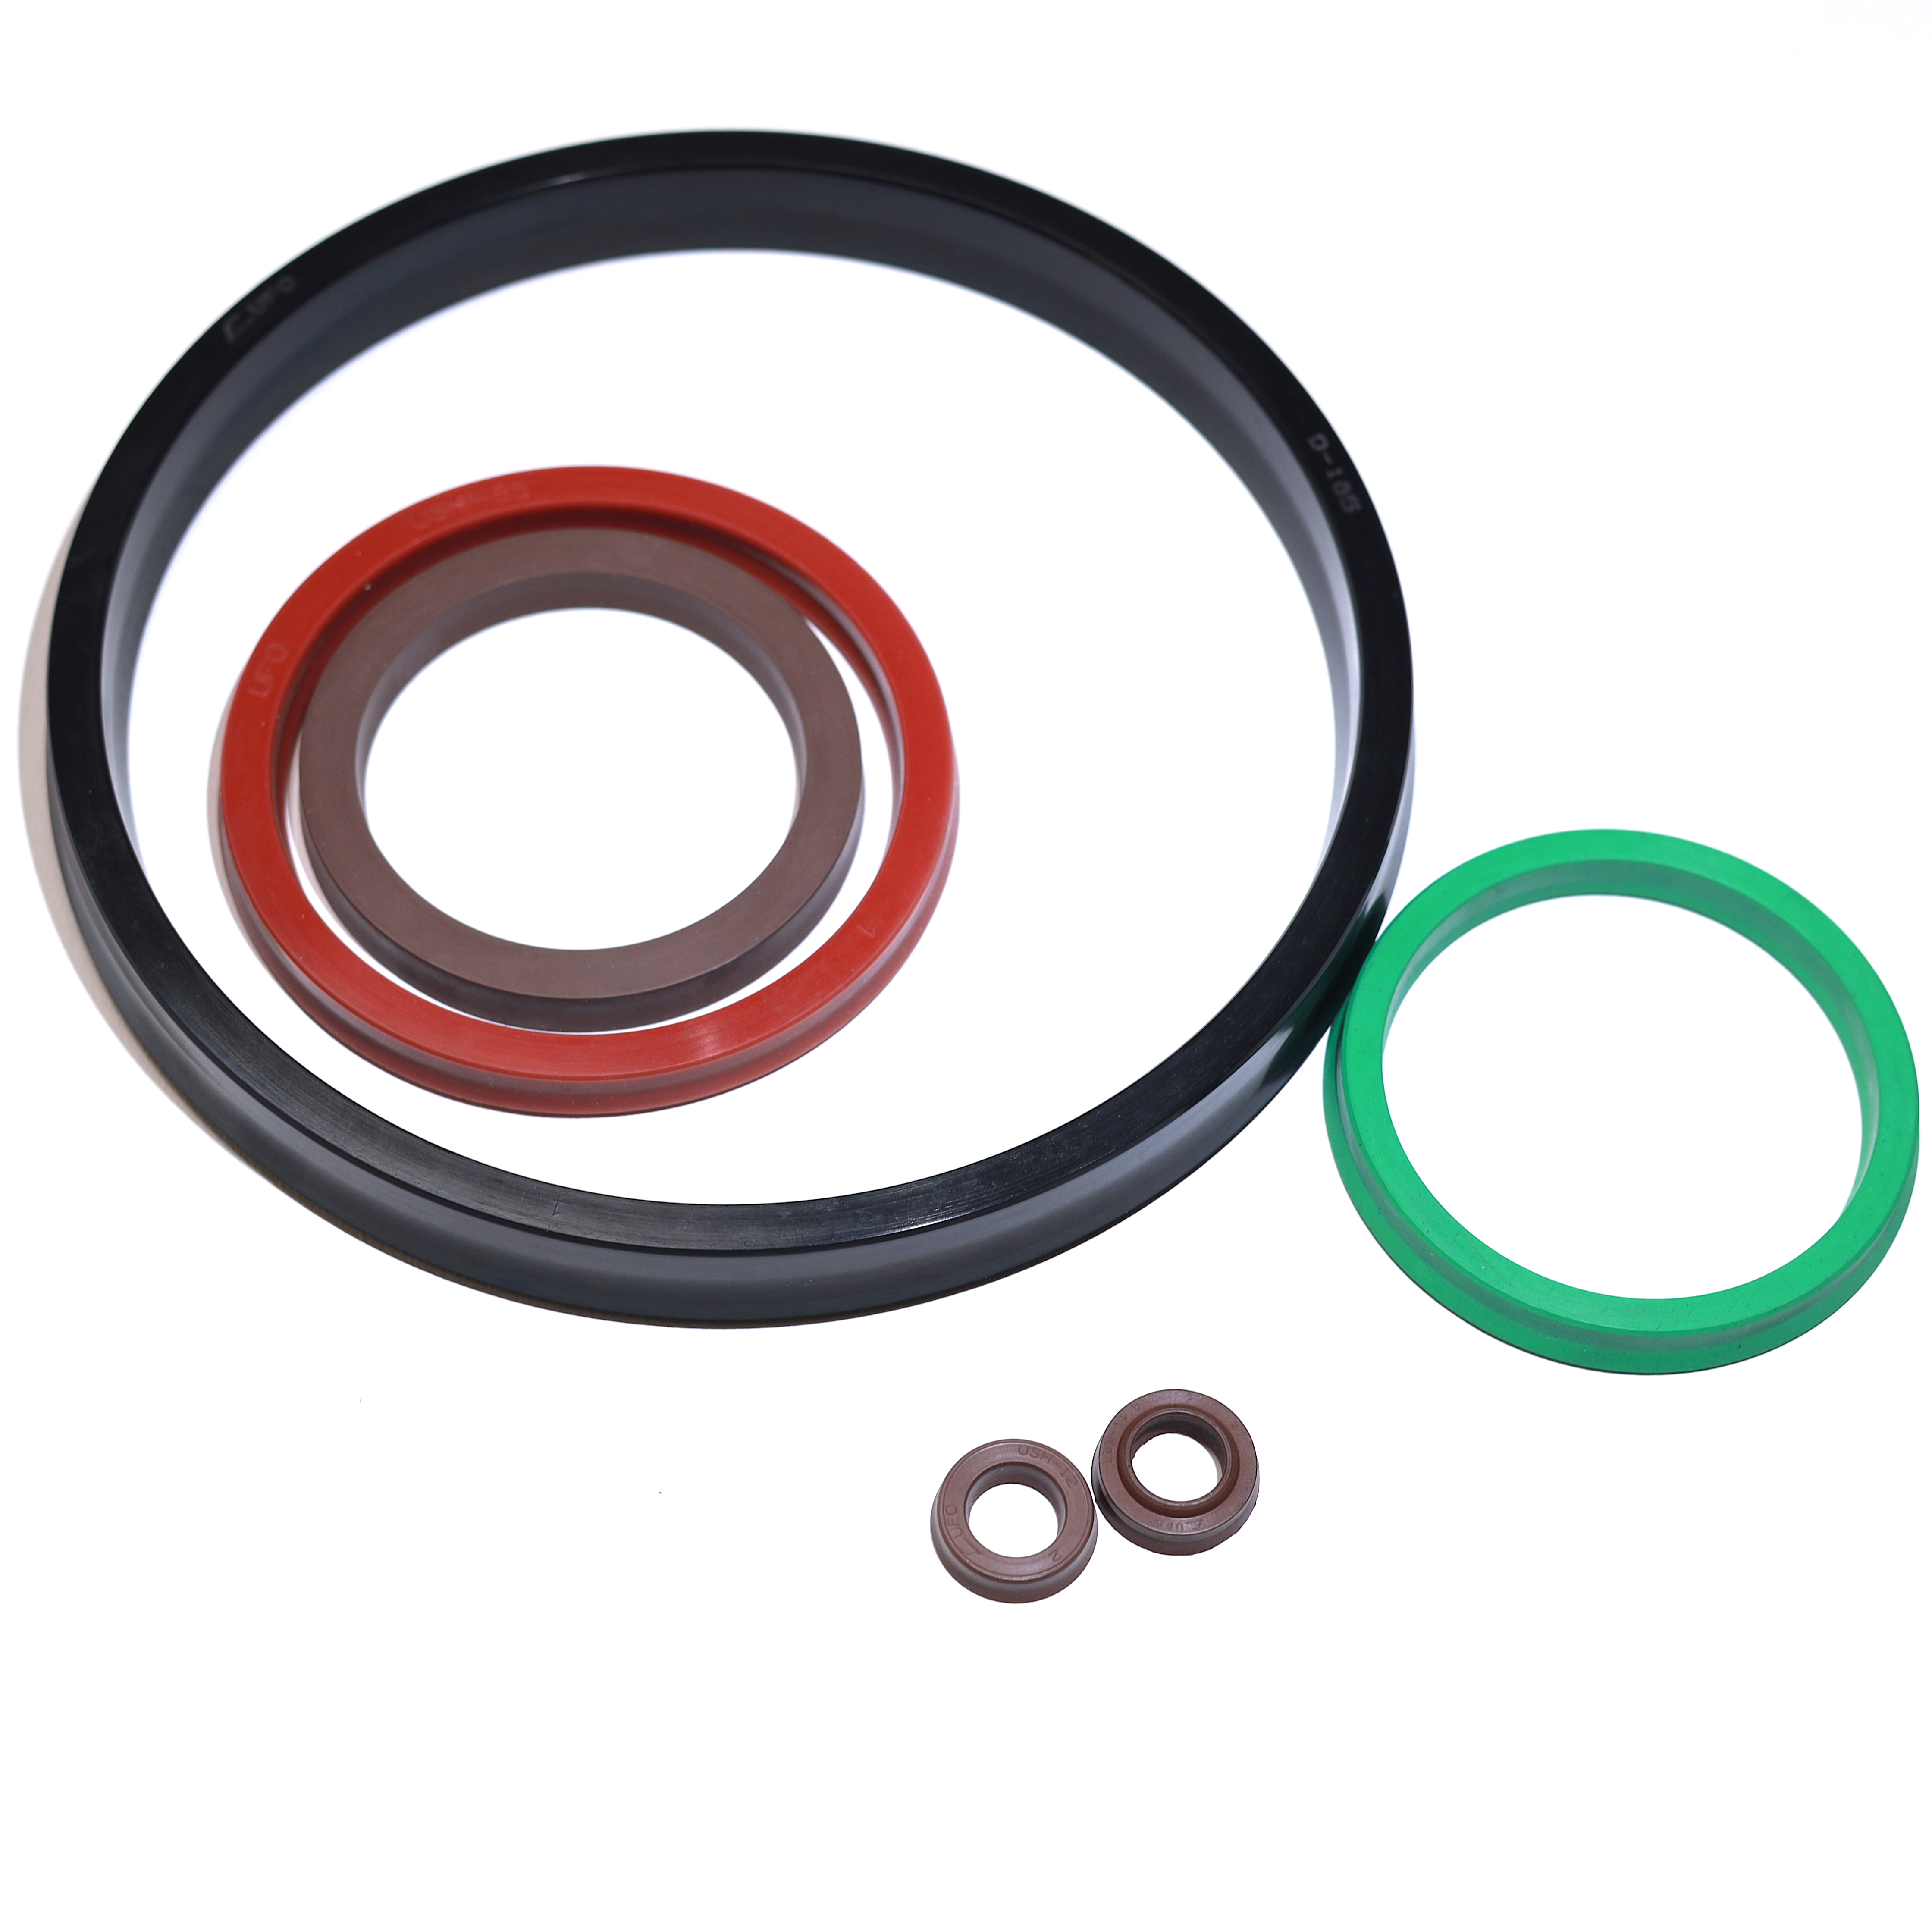 Free Sample AS568 Standard Sizes FKM EPDM Silicone O-Ring For Heat Resistant